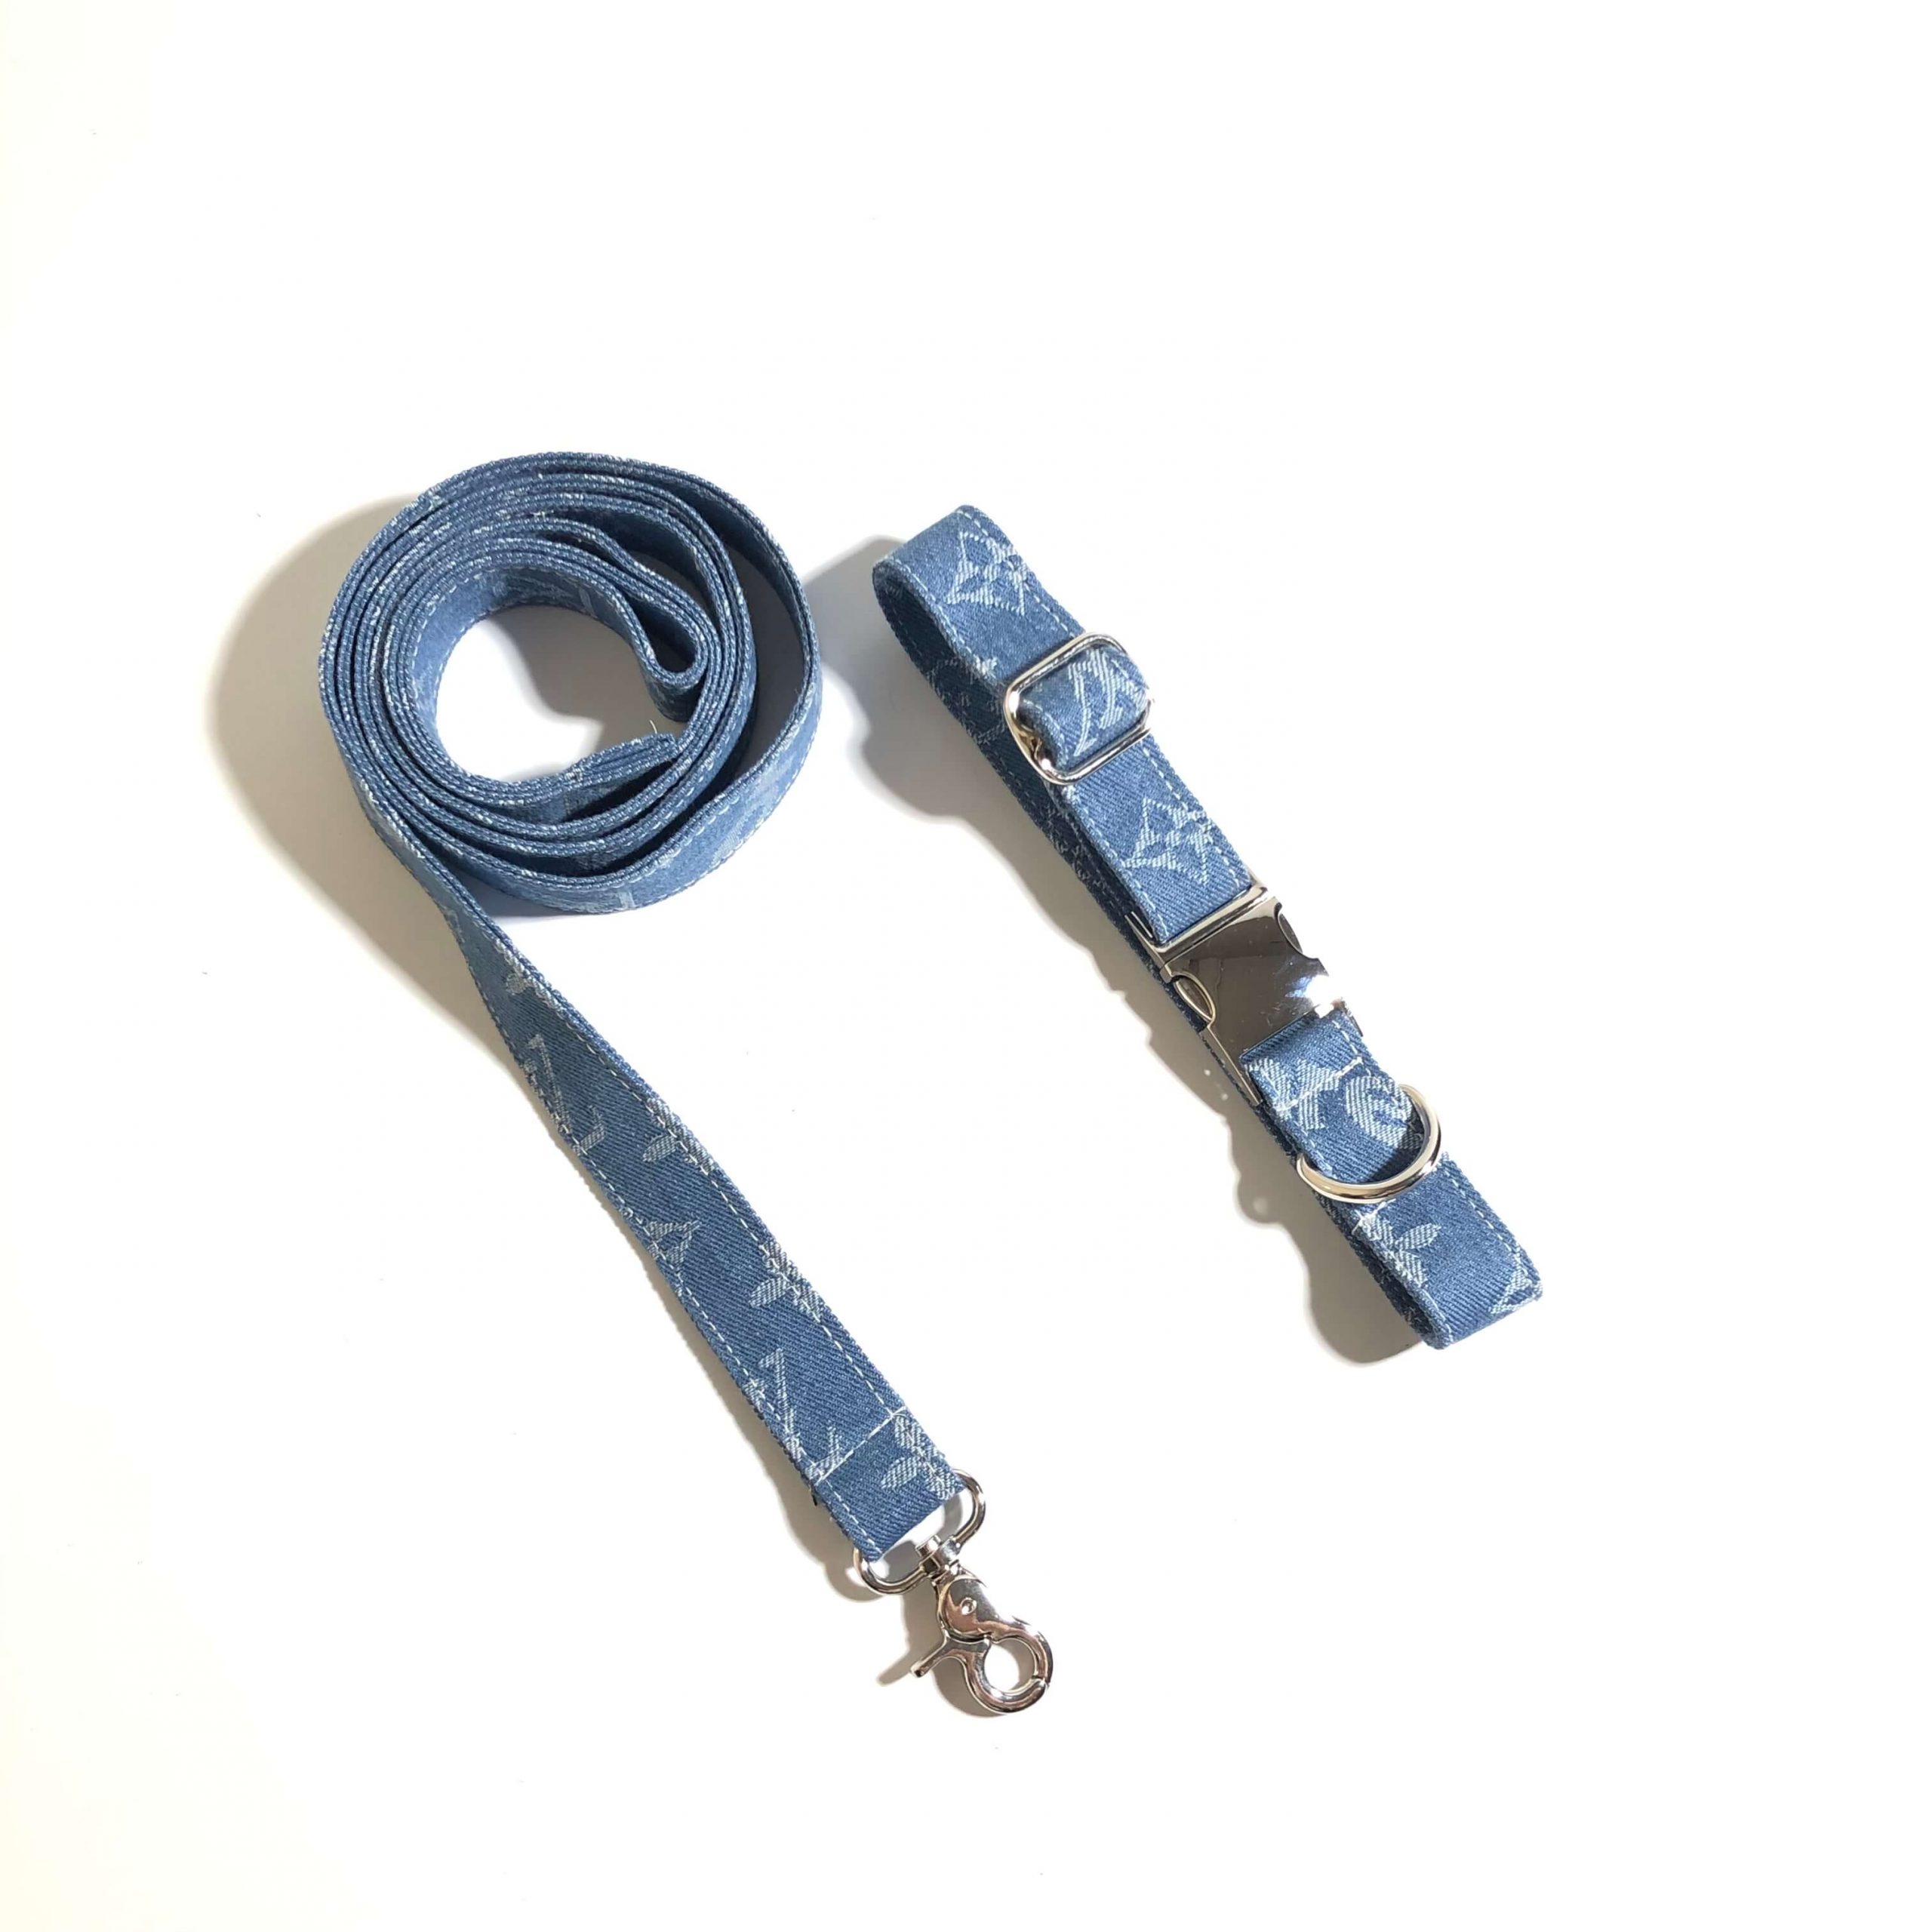 chewy vuitton dog collar and leash set